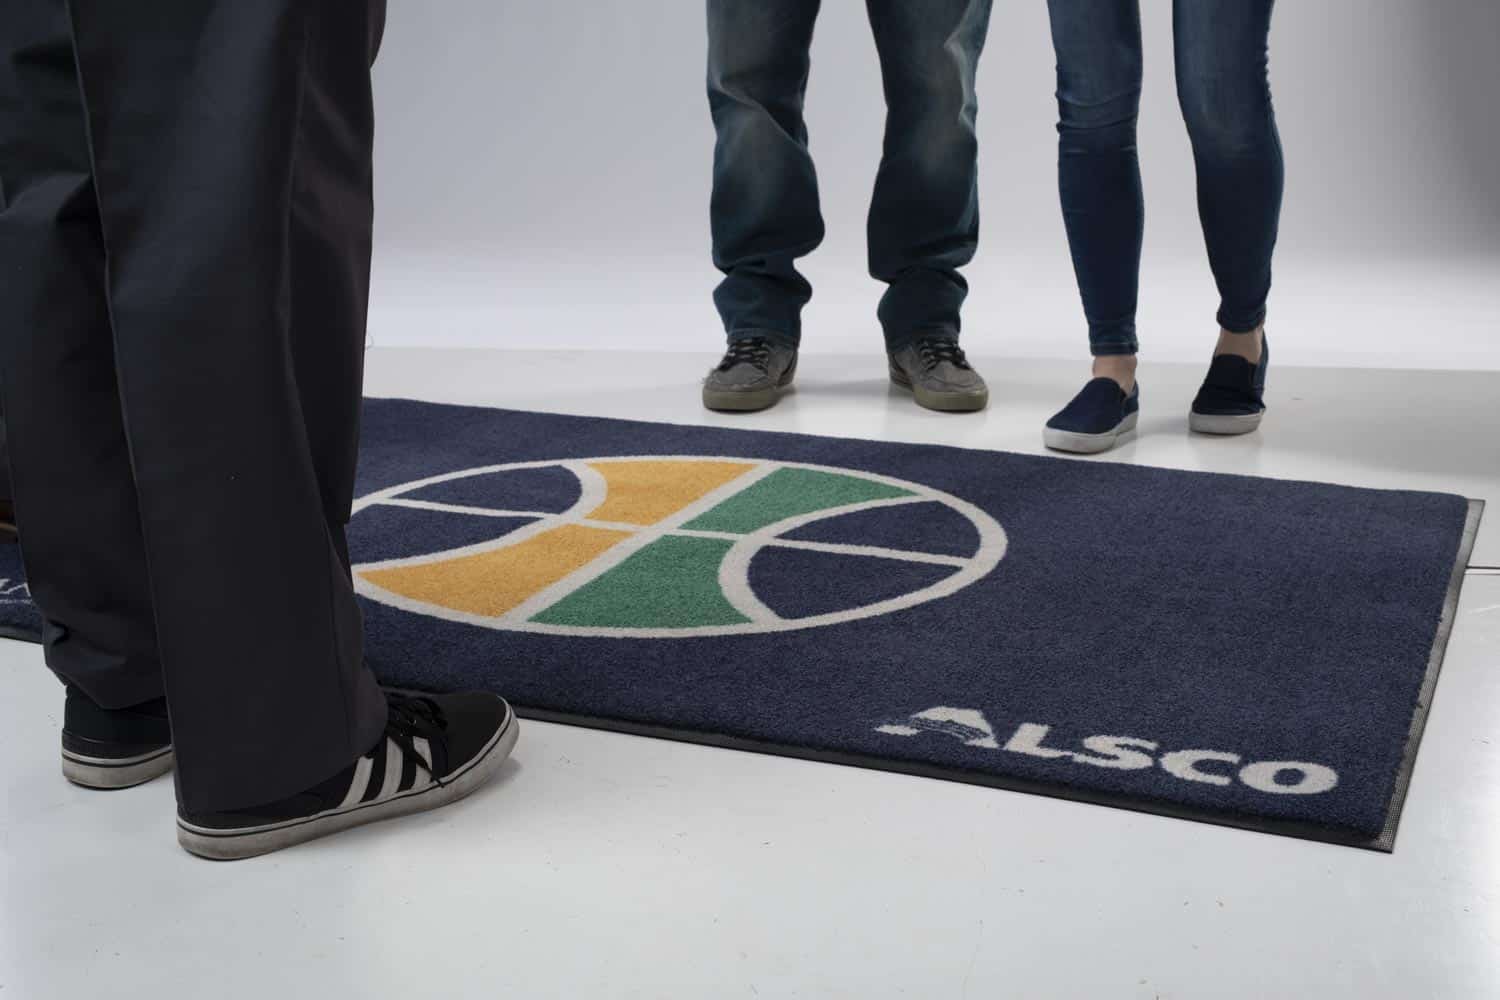 Anti-Fatigue Flooring & Industrial Mats, AMARCO Products